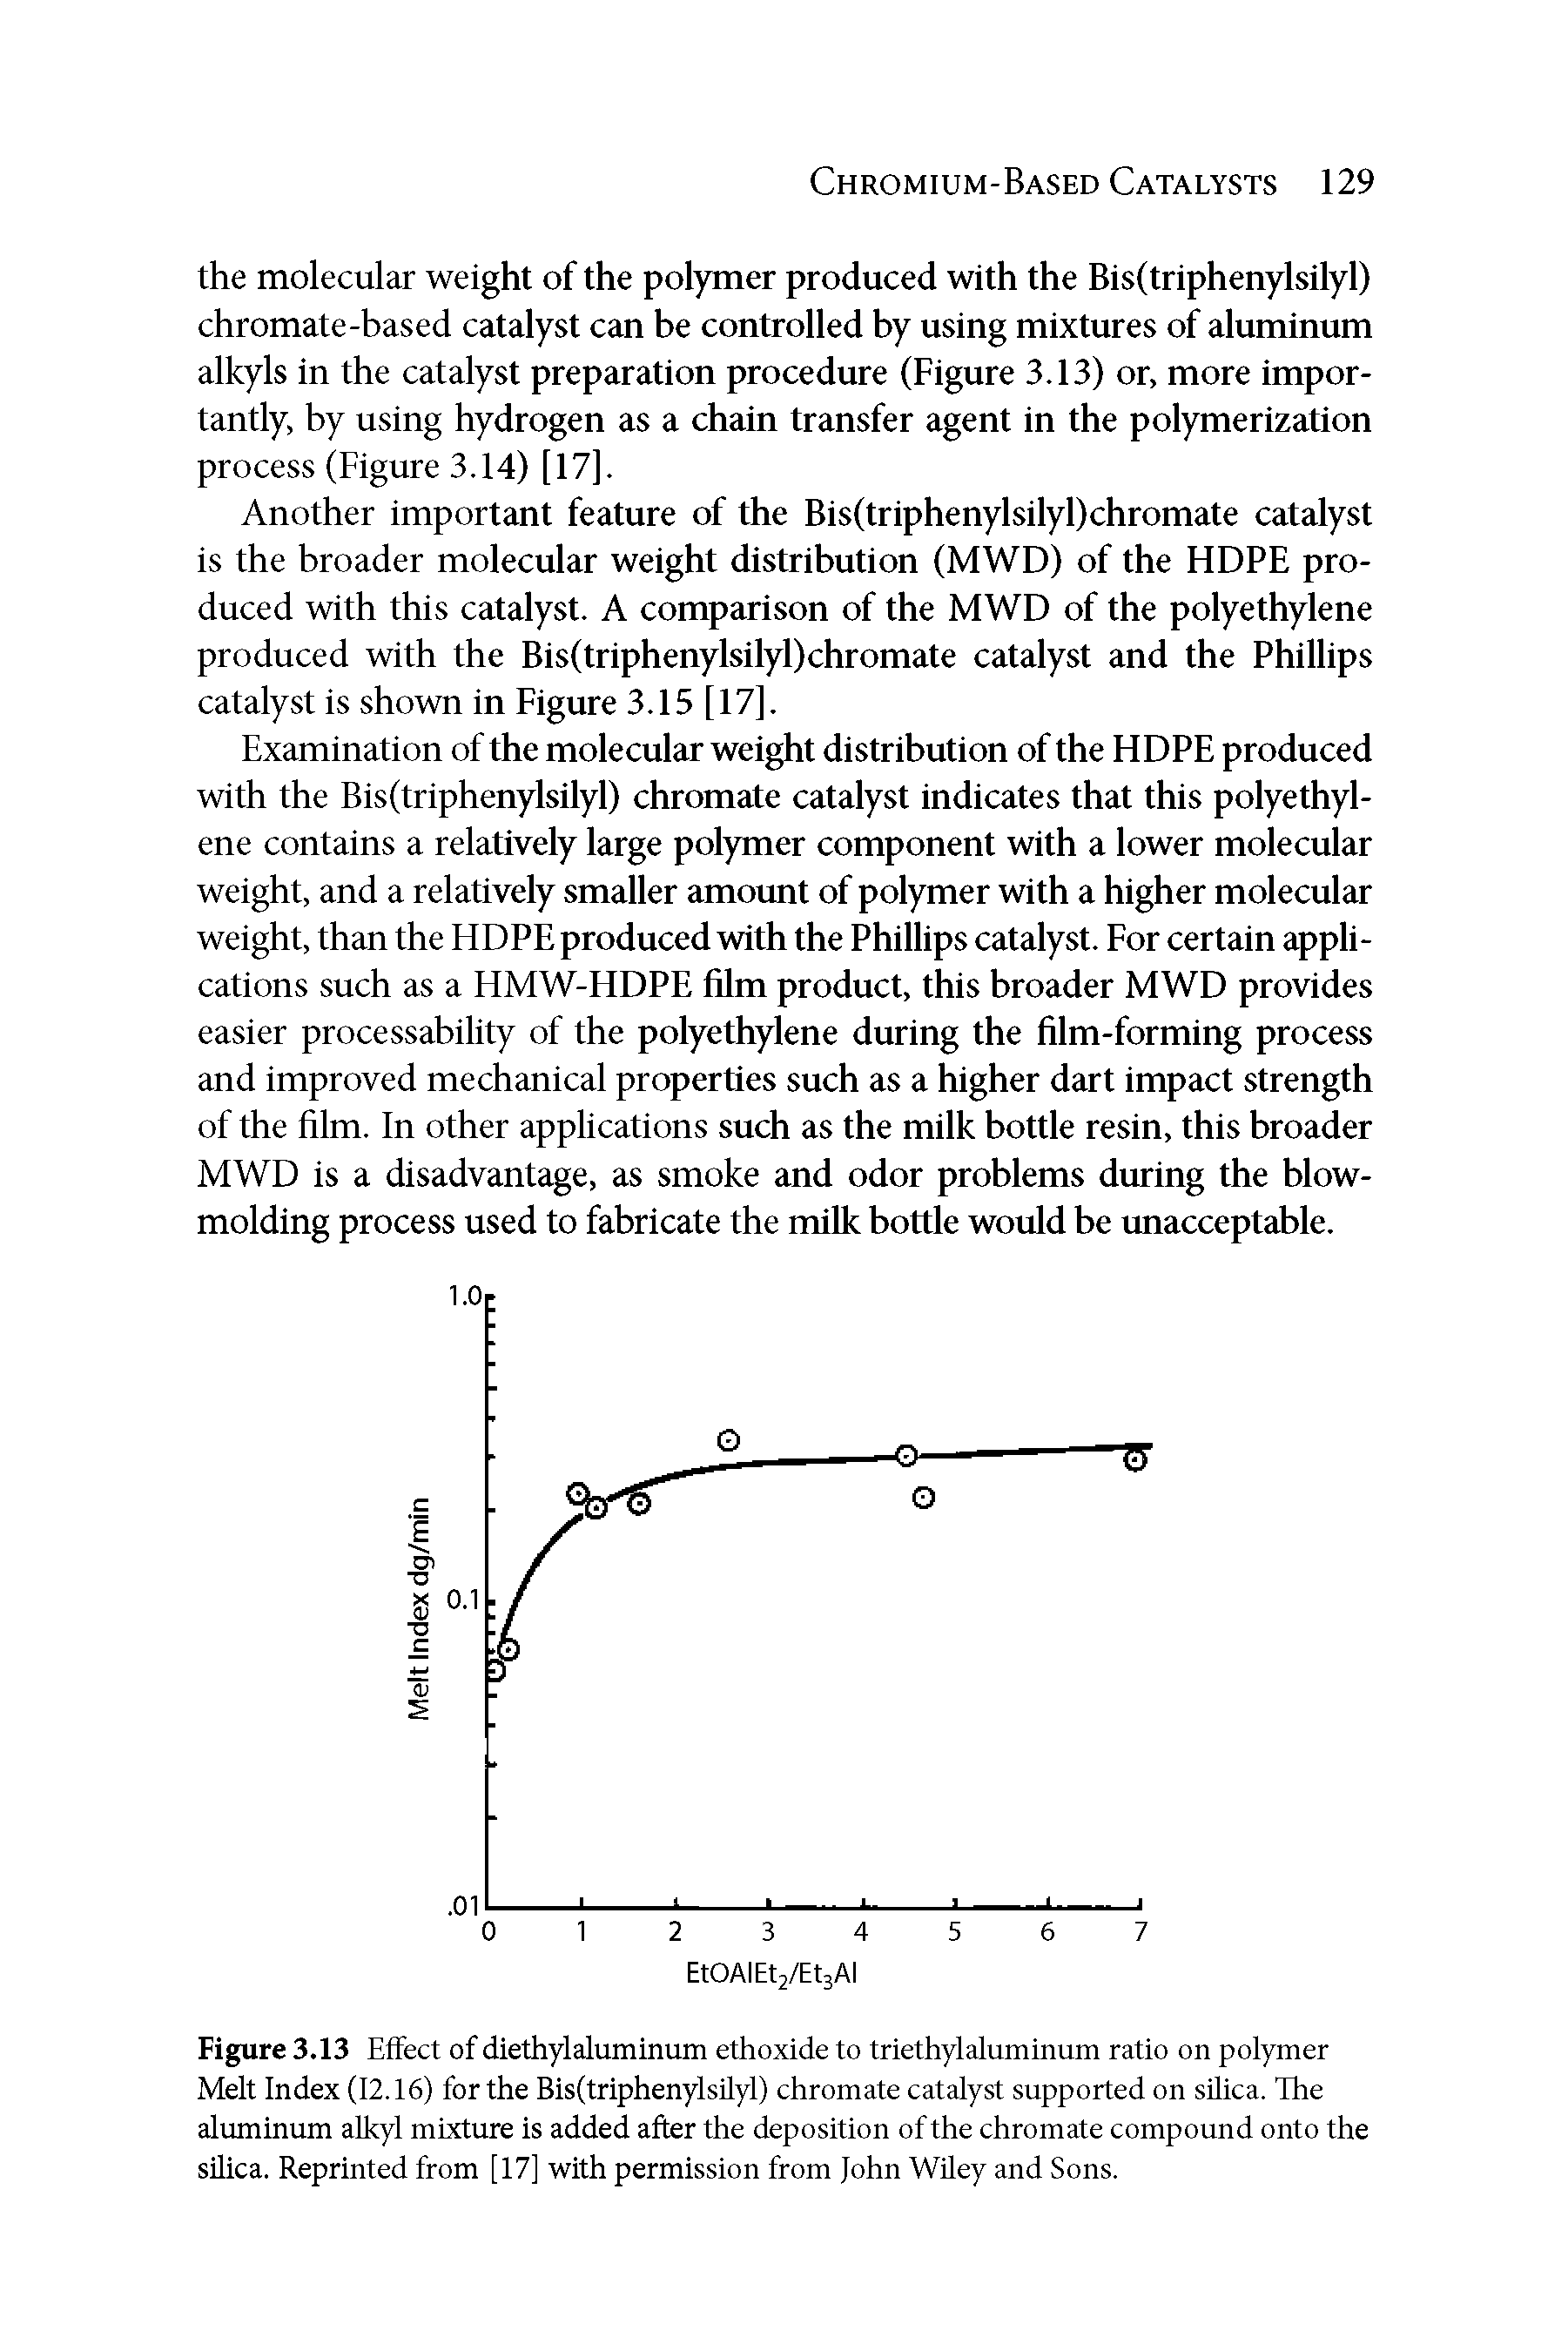 Figure 3.13 Effect of diethylaluminum ethoxide to triethylaluminum ratio on polymer Melt Index (12.16) for the Bis(triphenylsUyl) chromate catalyst supported on silica. The aluminum alkyl mixture is added after the deposition of the chromate compound onto the silica. Reprinted from [17] with permission from John WUey and Sons.